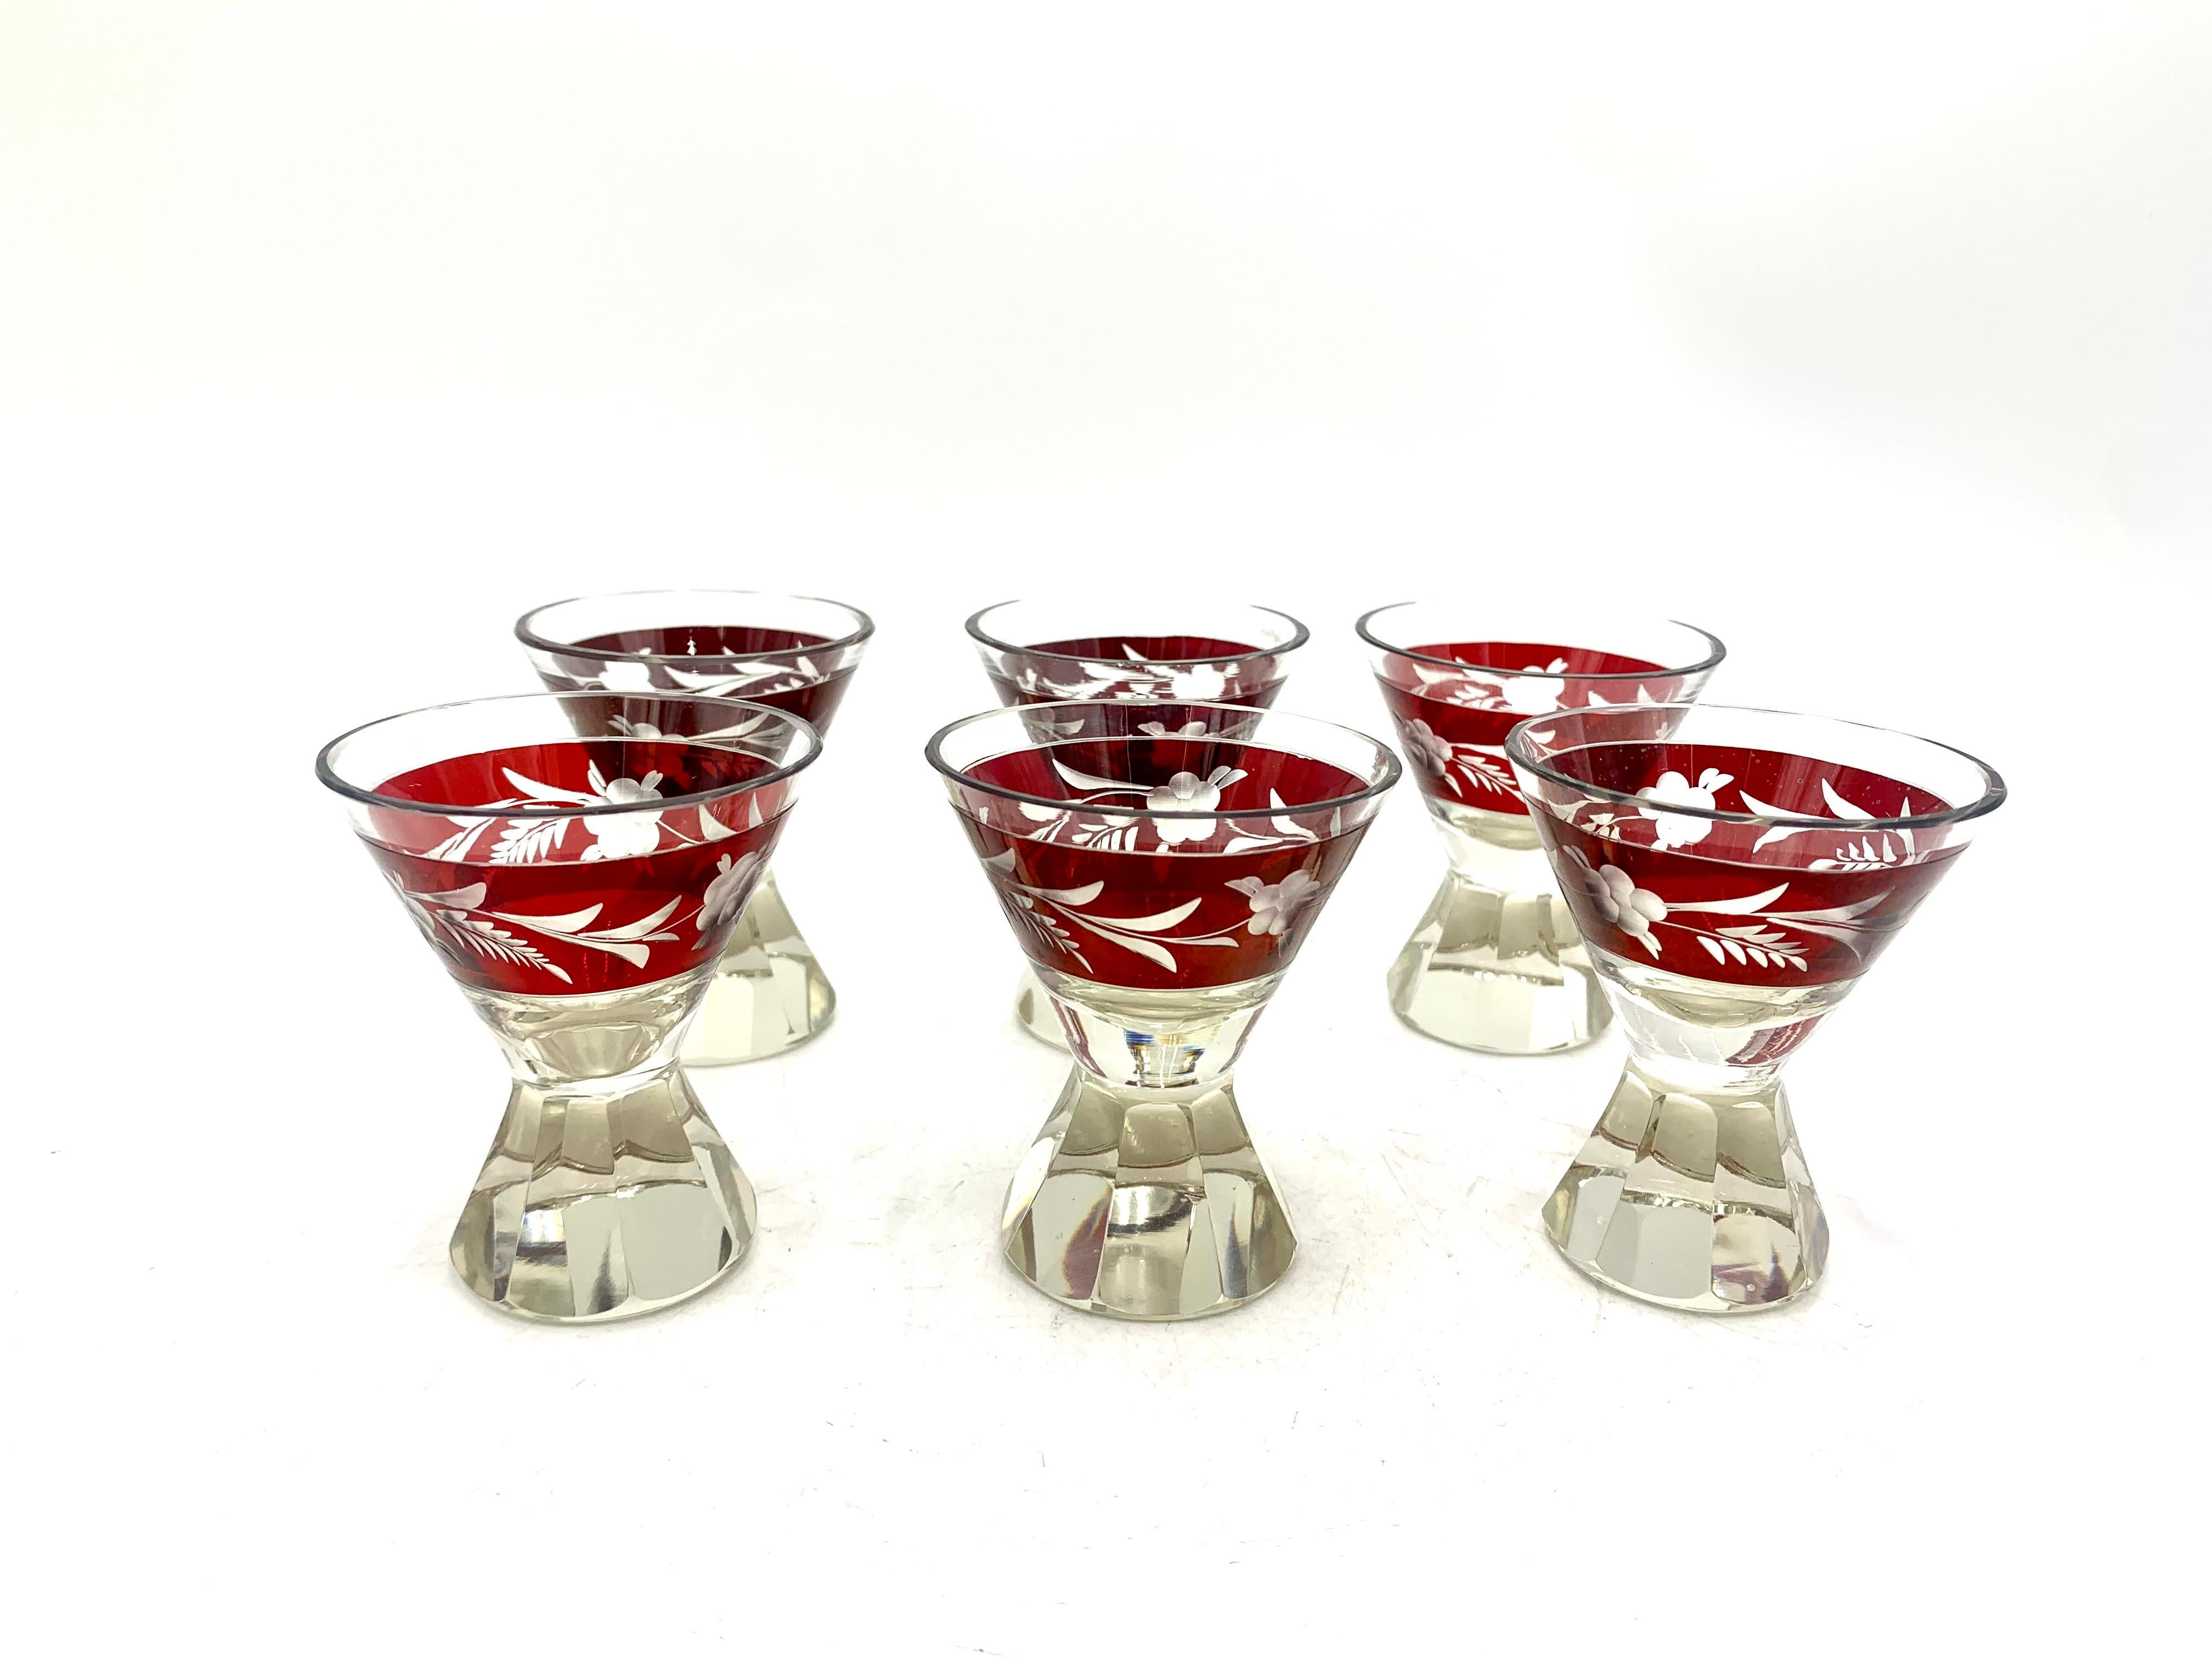 Beautiful Art Deco liqueur set (carafe + 6 glasses) in Karl Palda style

Set made in the Czech Republic in the 1930s.

Very good condition, one glass has a small damage shown in the photo.

carafe: height 24cm, width 13cm, depth 5cm

glasses: height